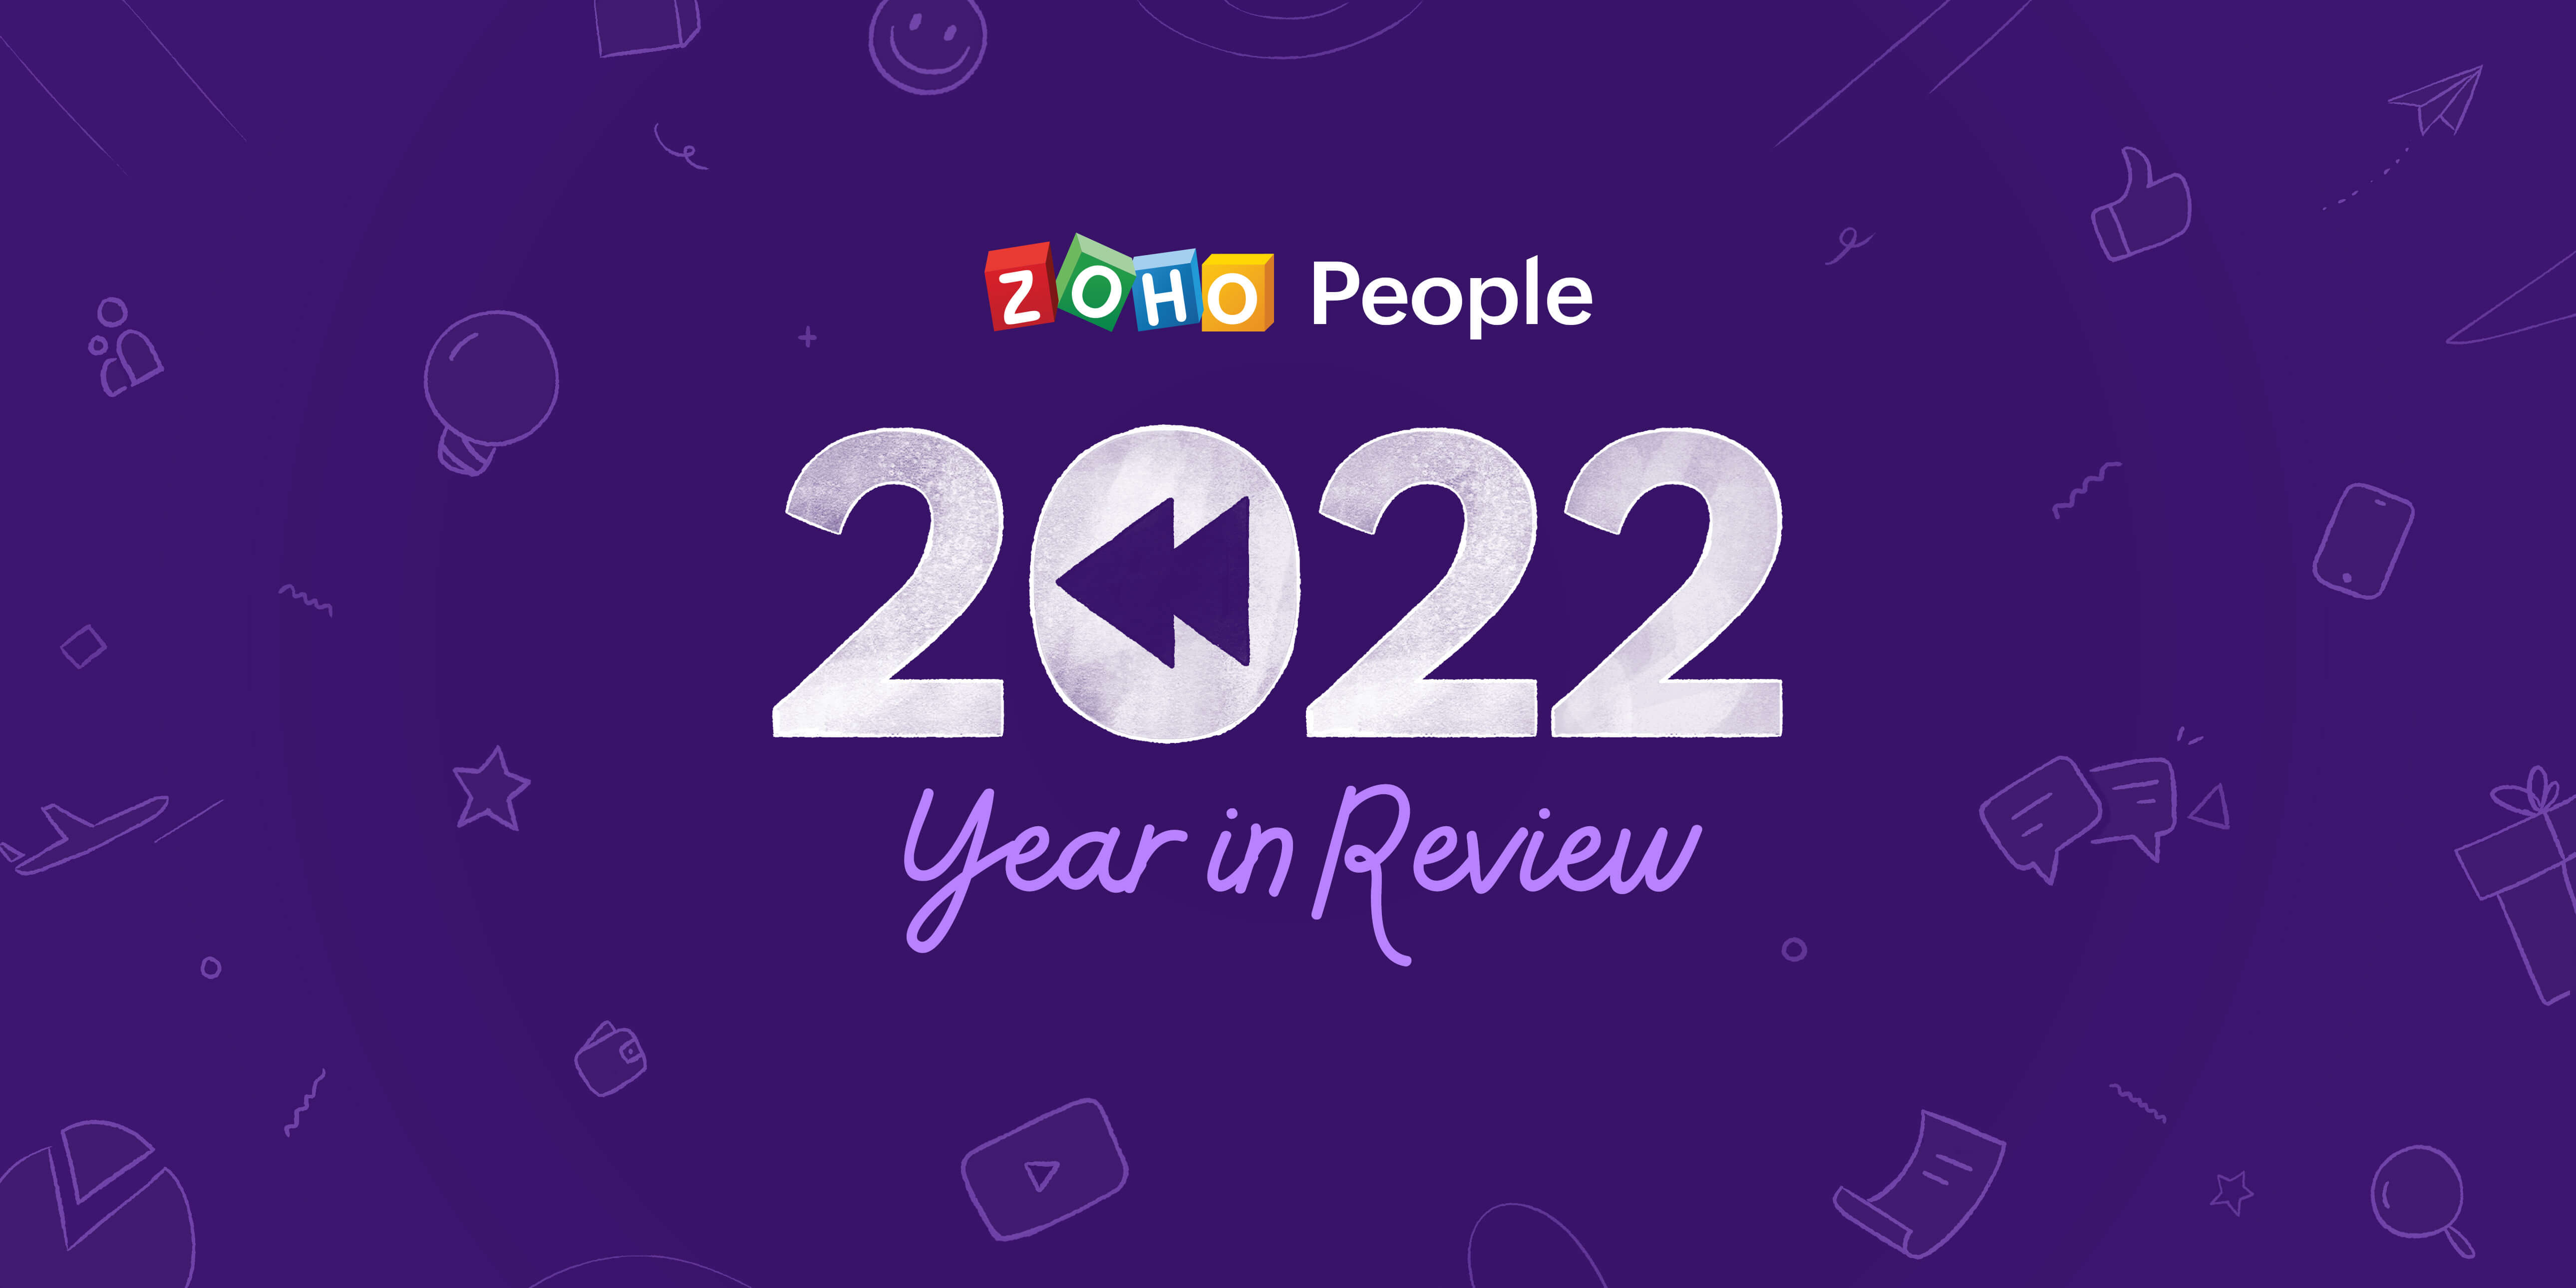 Zoho People: Year in Review 2022